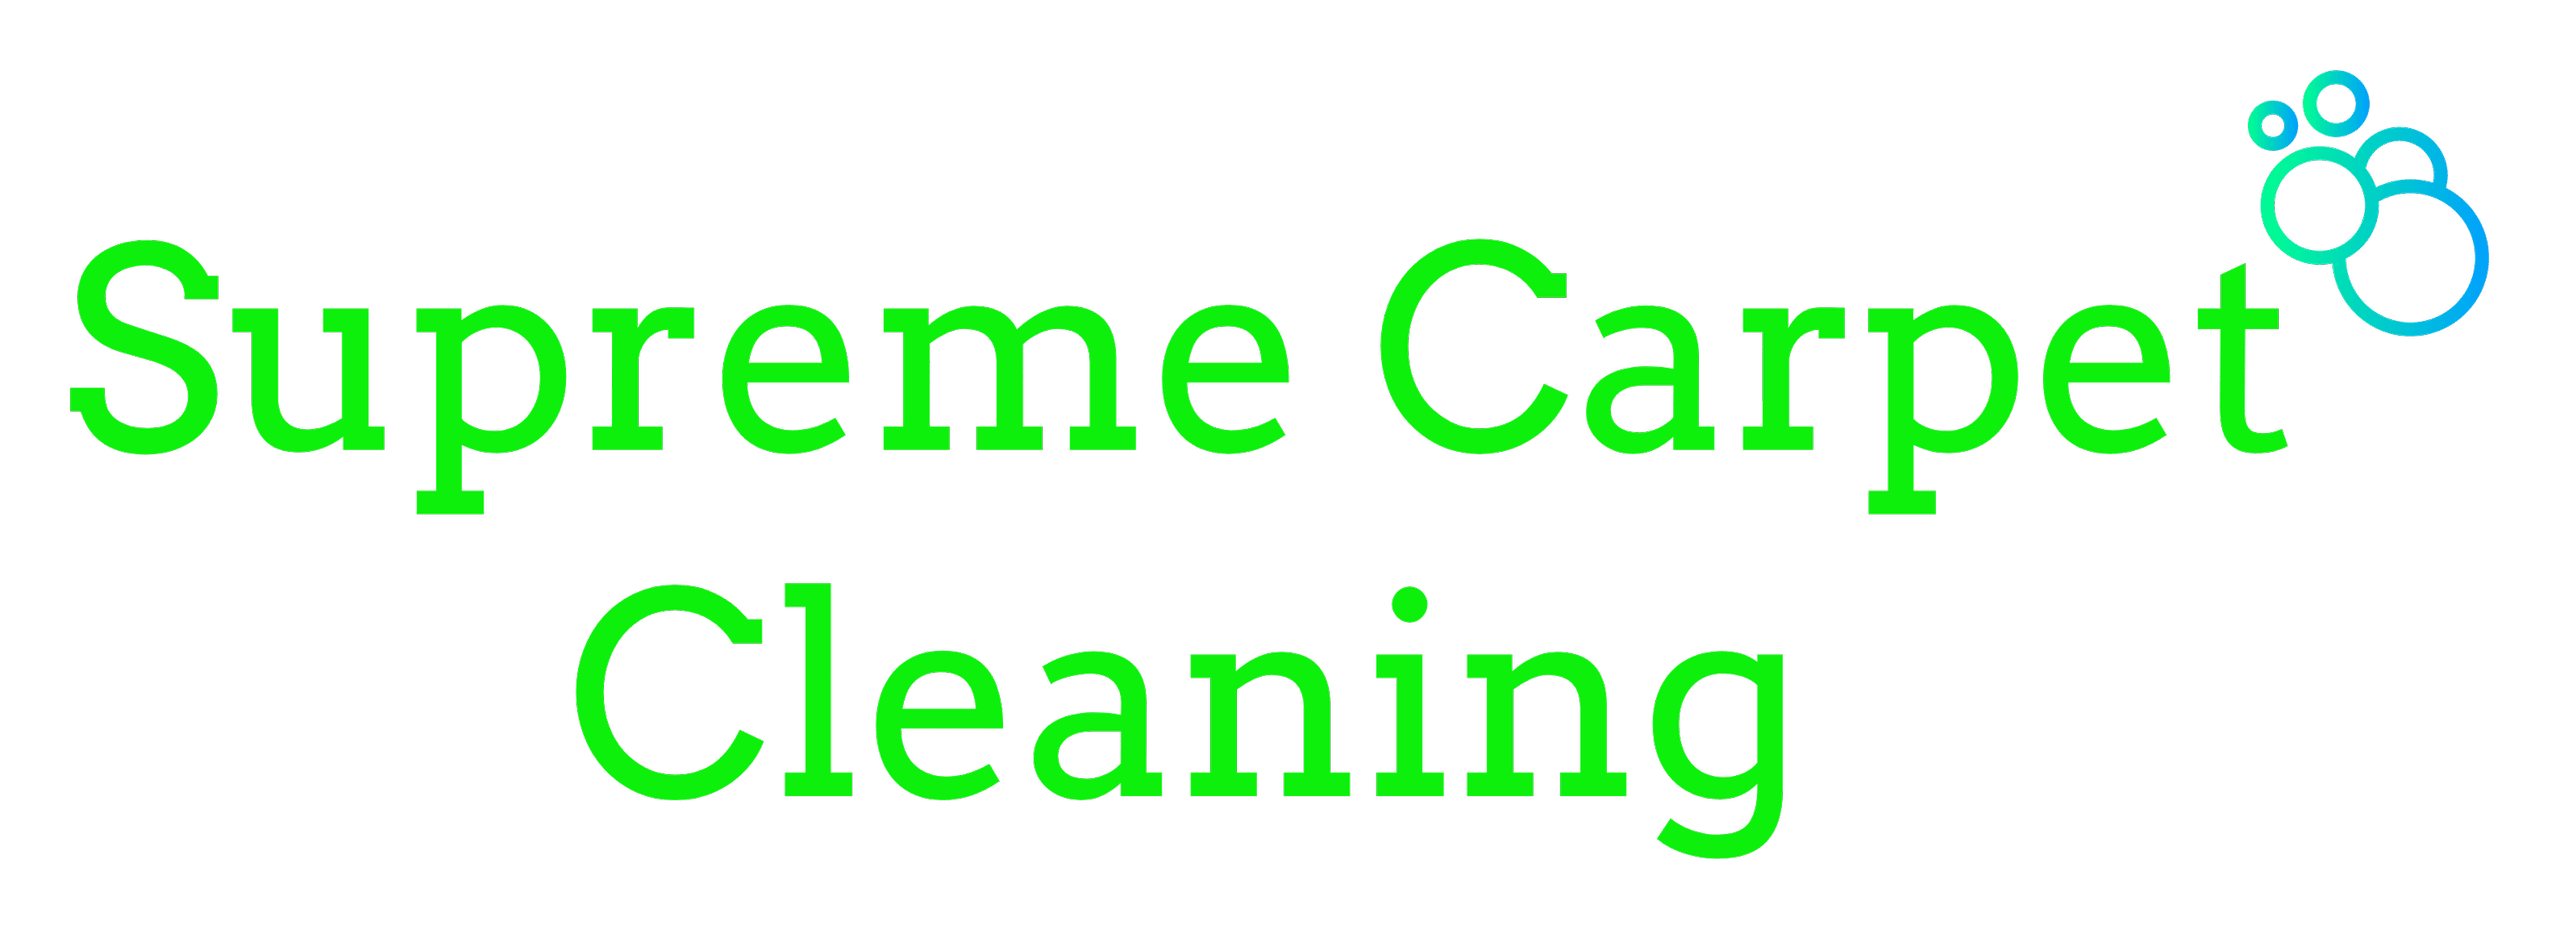 Supreme Carpet cleaning